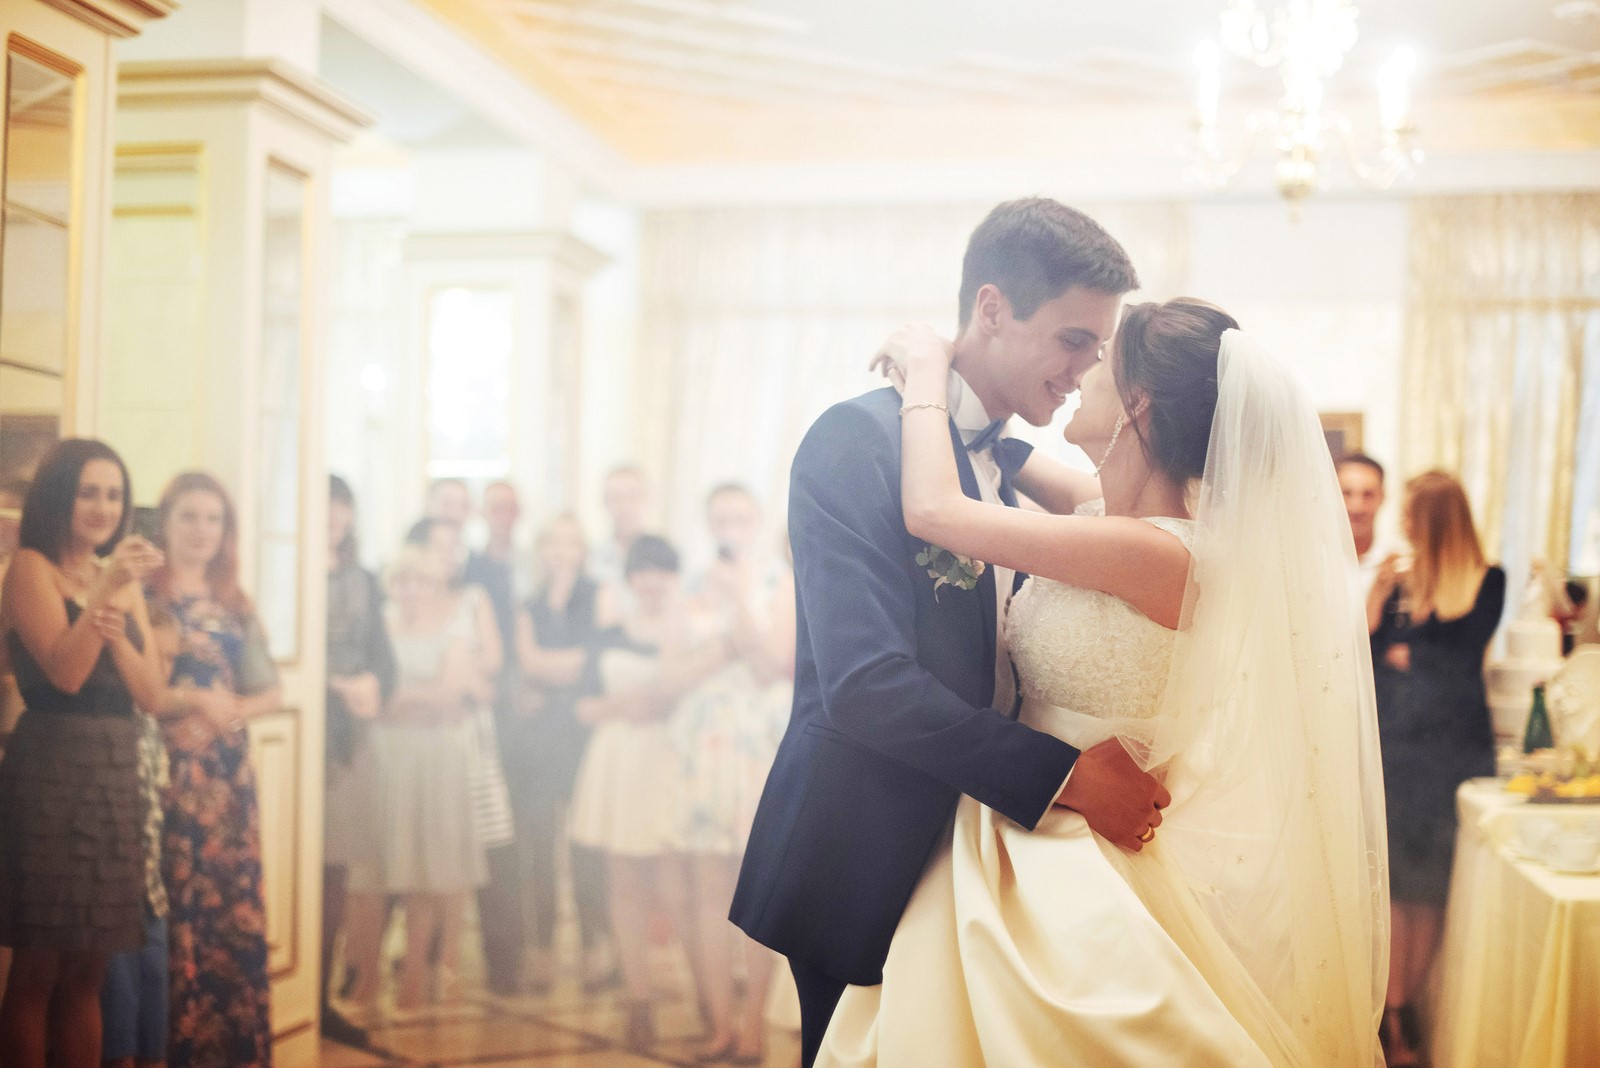 4 Tips on How You Can Be Prepared for Your First Dance